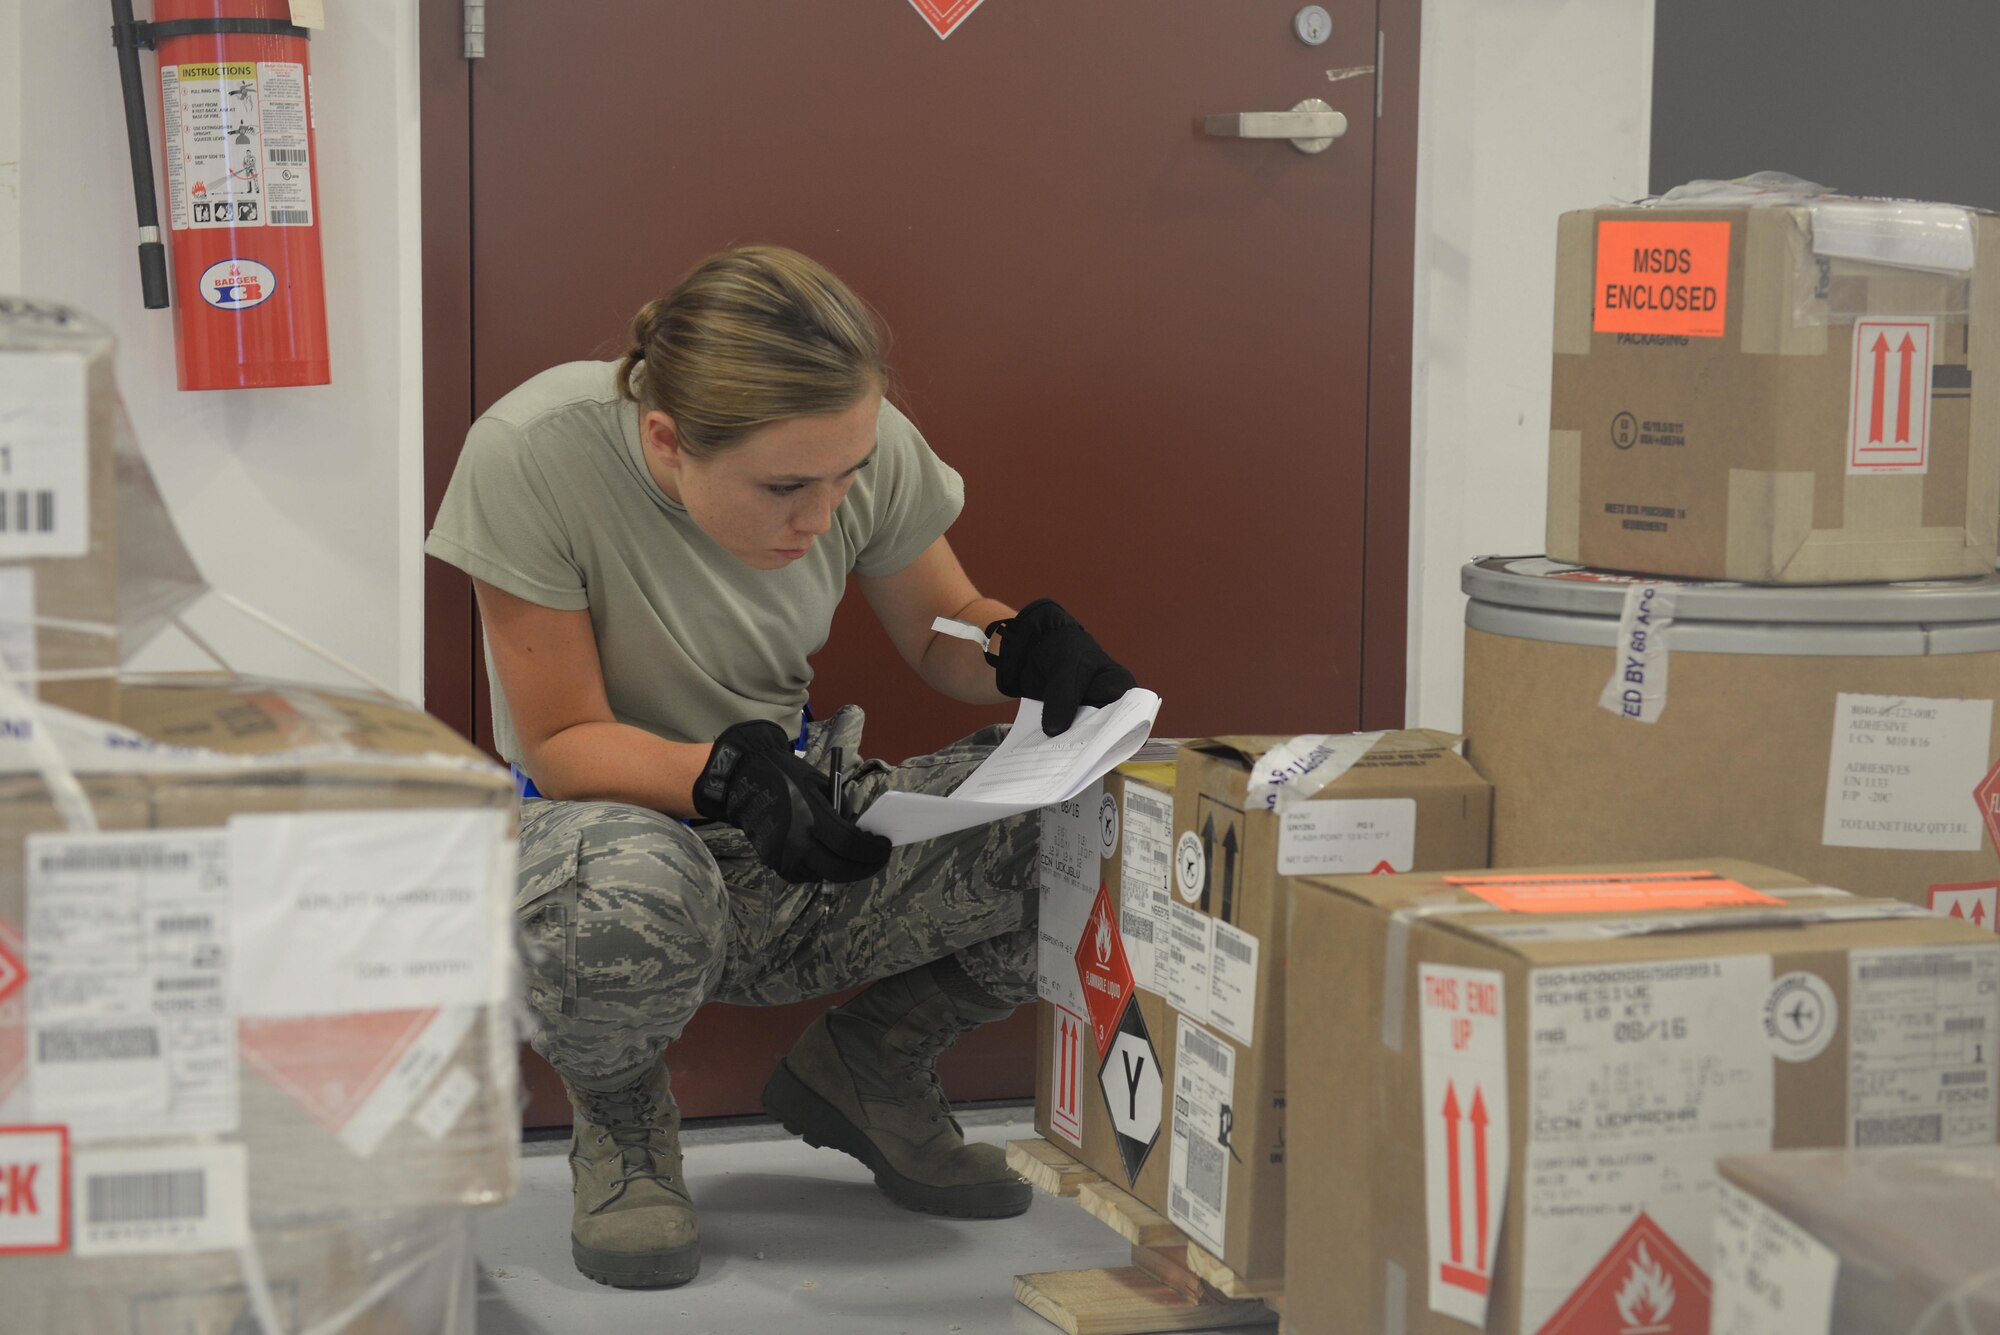 Airman 1st Class Adria Brown, 734th Air Mobility Squadron aircraft services technician, verifies incoming cargo Sept. 7, 2016, at Andersen Air Force Base, Guam. The 734th AMS, a tenant unit from Air Mobility Command, supports the 36th Wing’s mission of projecting airpower by transporting essential material to and from Andersen AFB or for humanitarian response. (U.S. Air Force photo by Airman 1st Class Jacob Skovo)
